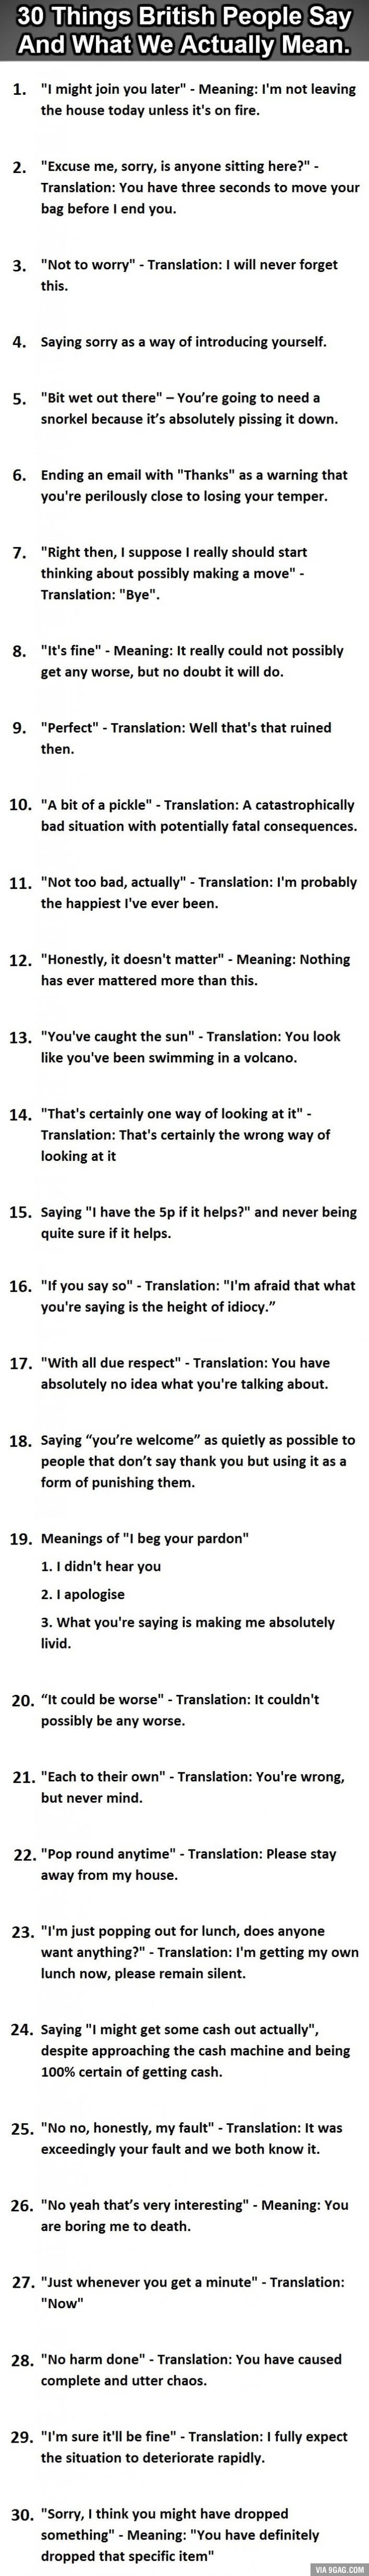 30 Things British People Say Vs What We Actually Mean. #9 Is Perfect ...